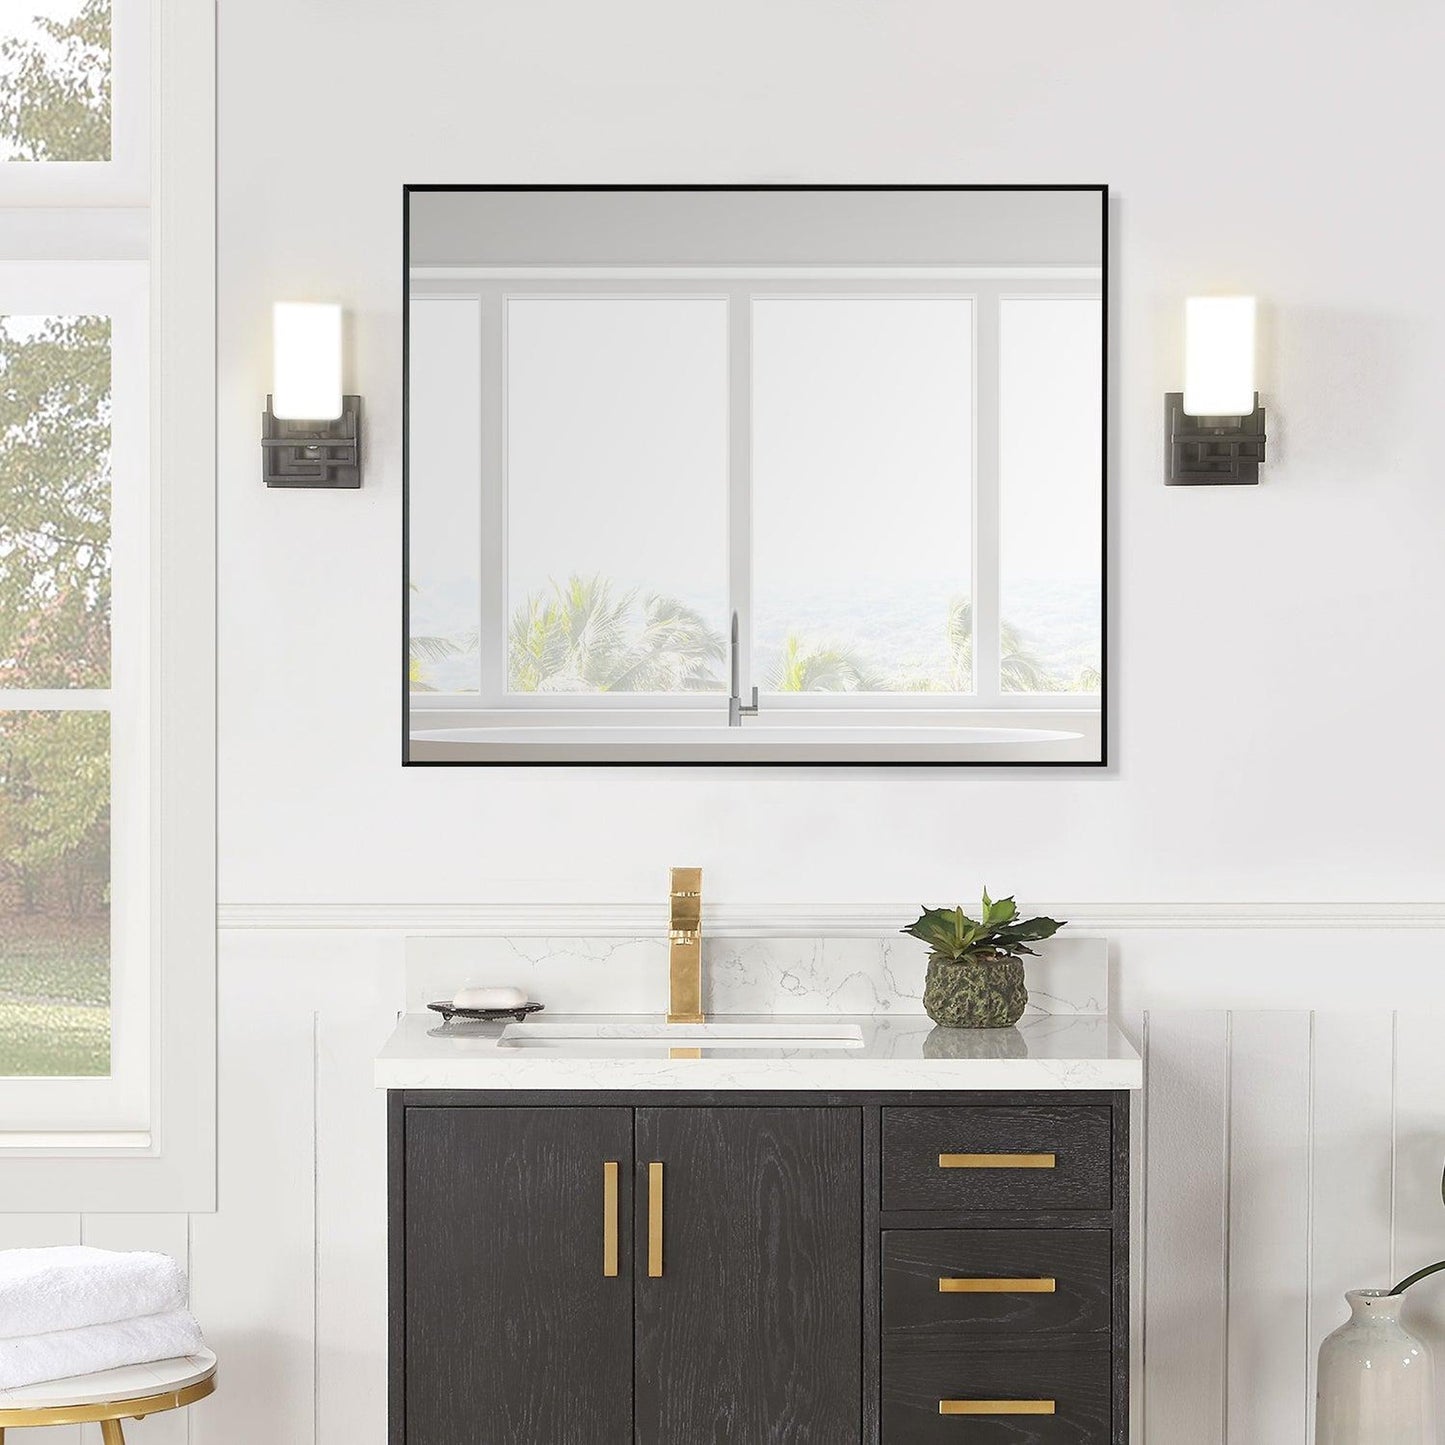 Altair Sassi 36" x 30" Rectangle Matte Black Aluminum Framed Wall-Mounted Mirror